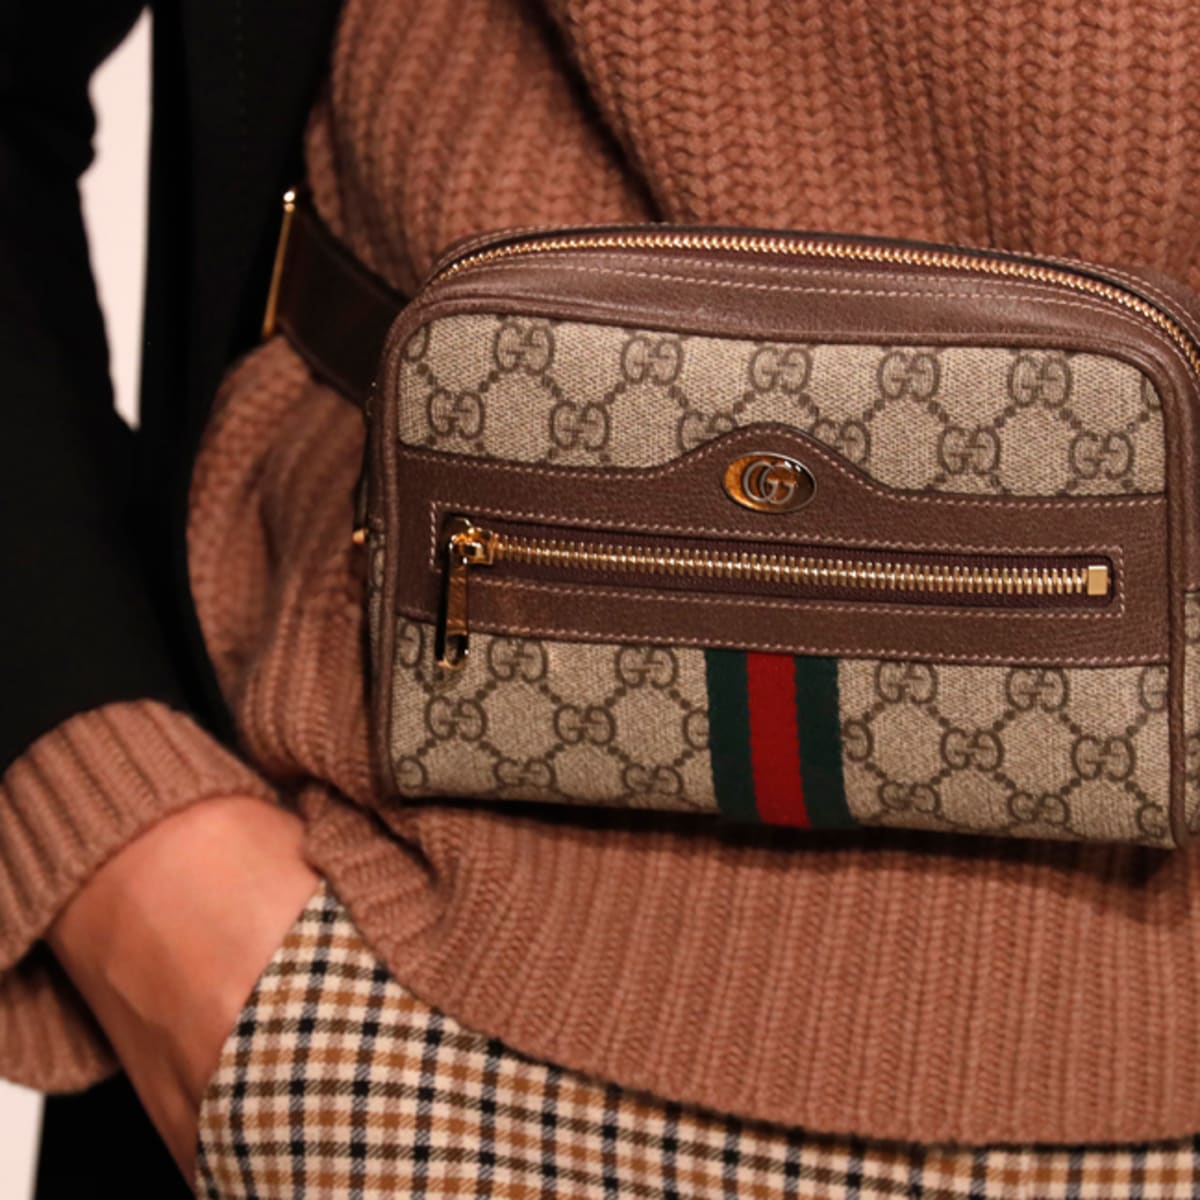 Gucci Is Back on Top as the World's Hottest Fashion Brand - Fashionista